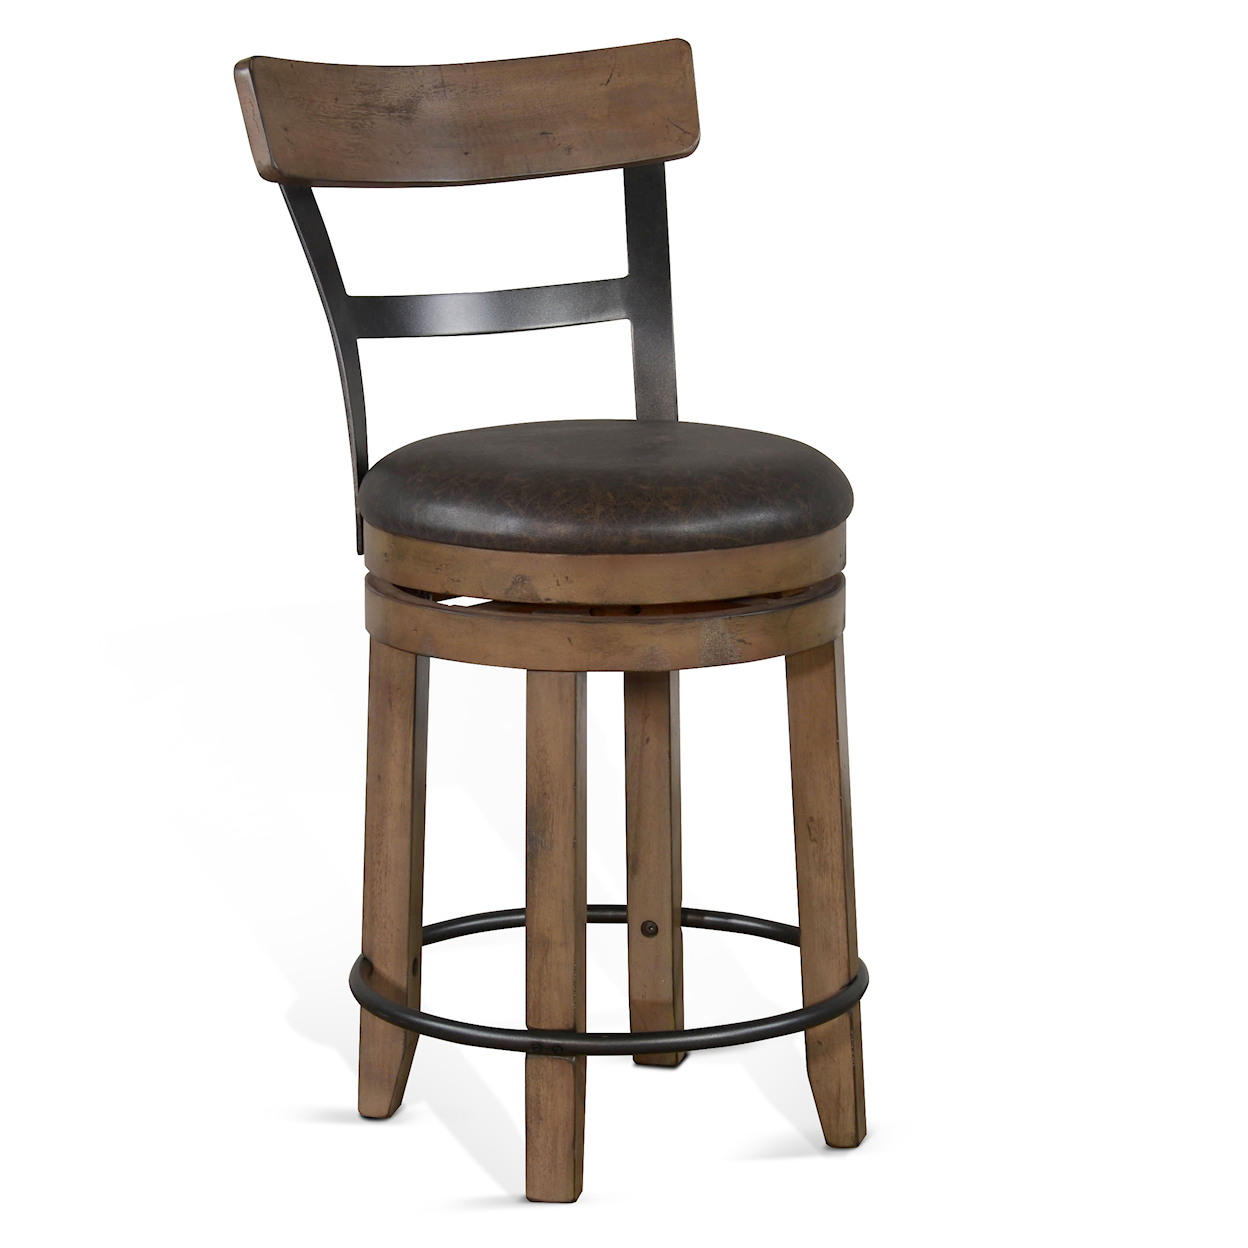 Sunny Designs Doe Valley Swivel Stool with Back